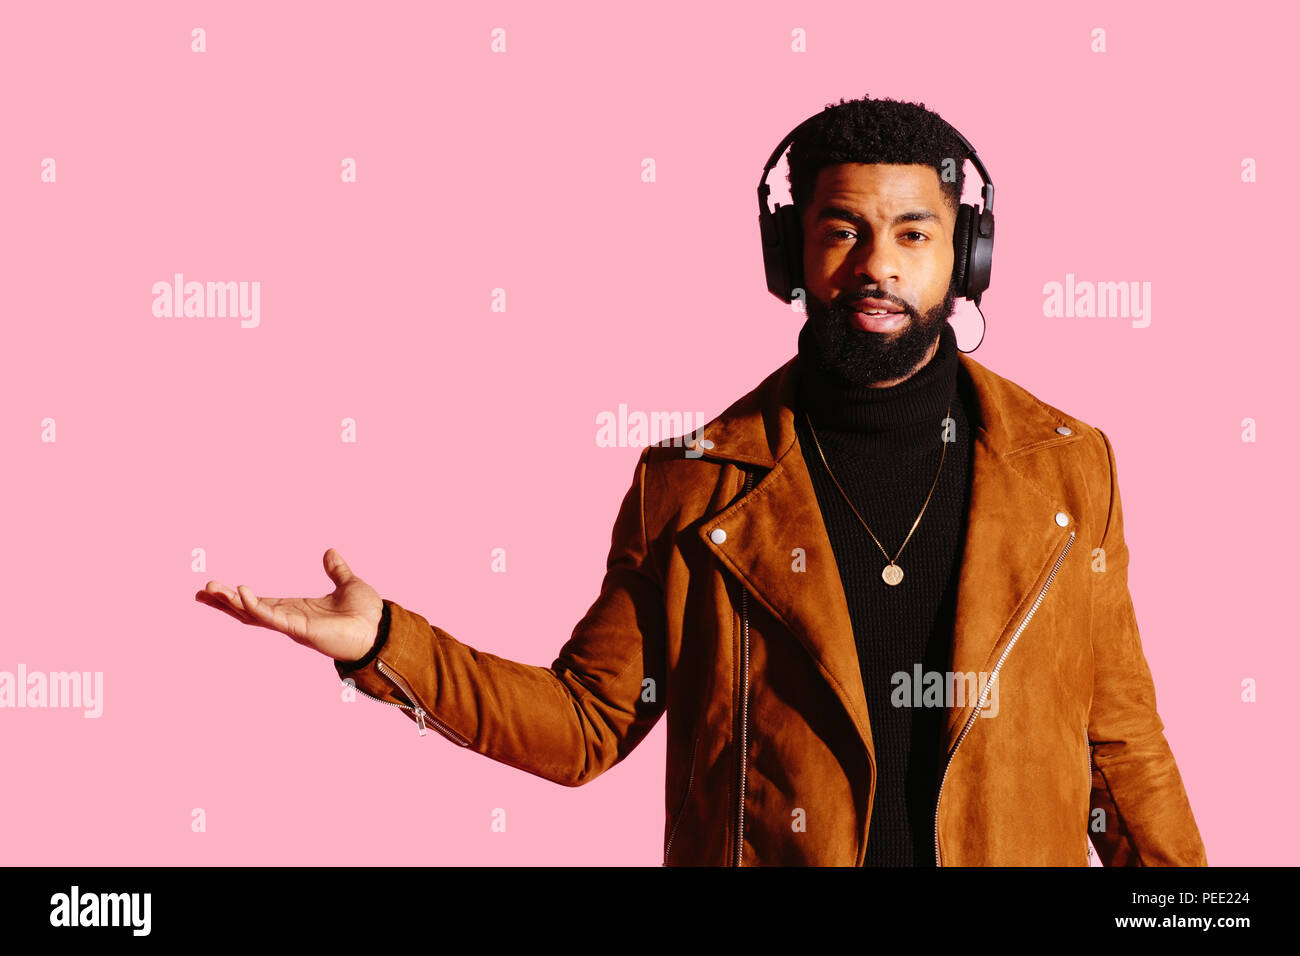 Portrait of a cool man with beard and headphones gesturing with his hand out isolated on pink studio background Stock Photo